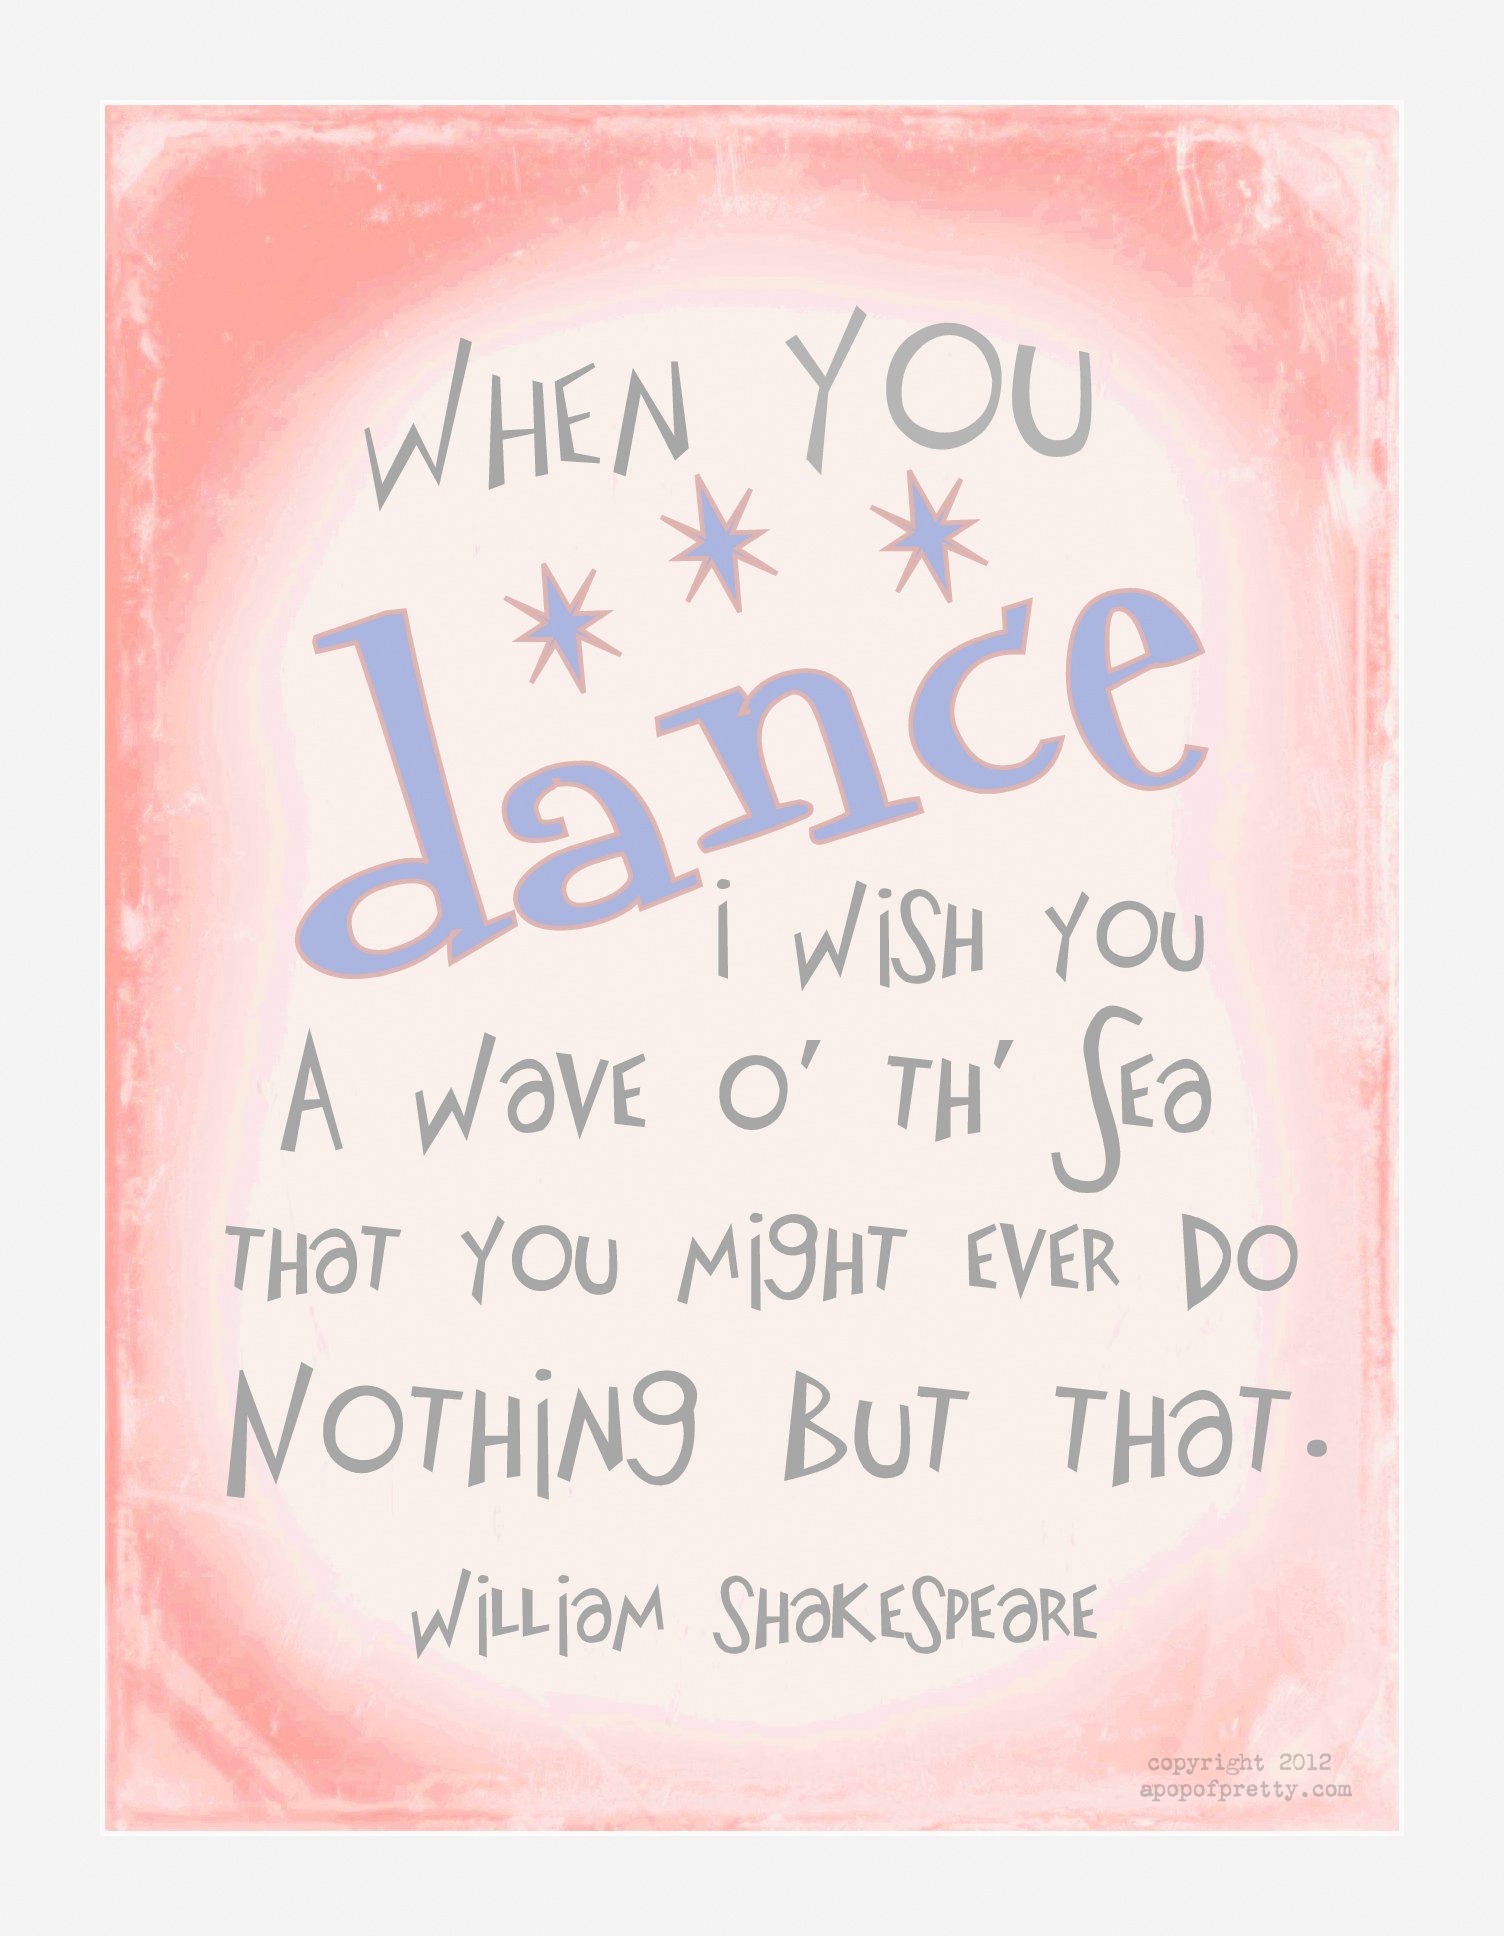 Dance Recital Free Printable: “When you dance, I wish you…” (from The Winter’s Tale, Shakespeare)